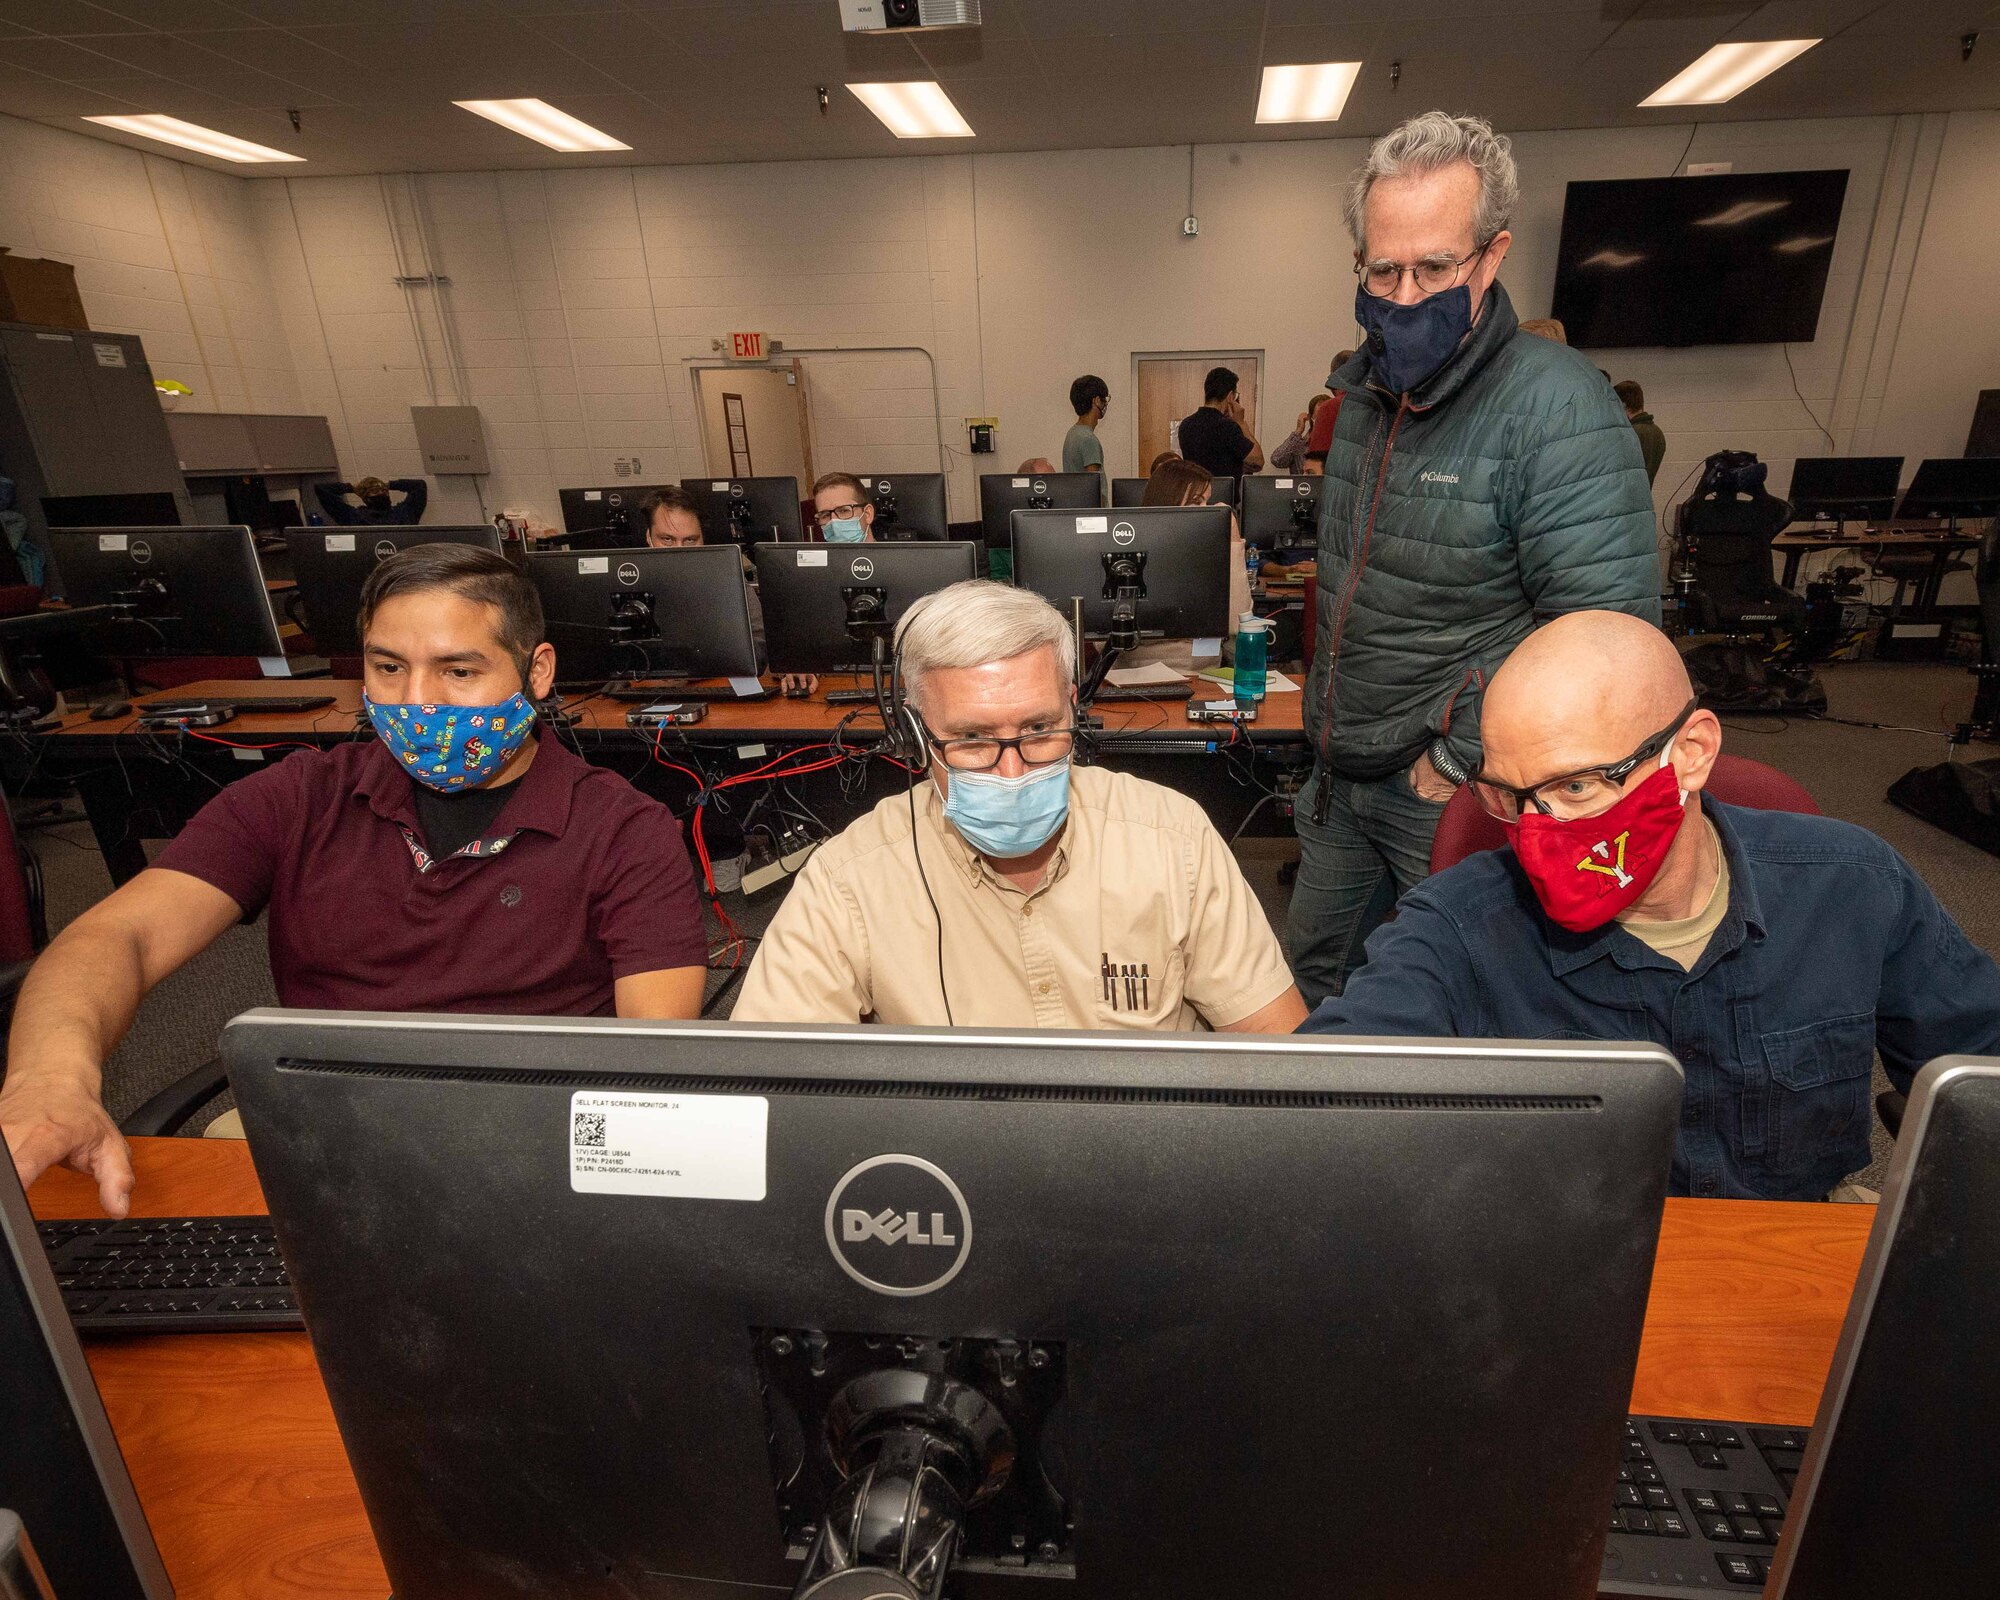 Orlando de la Garza, Ross Dudley, Jeffrey MacGillivray, and Joe Aldrich (left to right) observe operations and collect data during AFRL’s Directed Energy and Kinetic Energy Directed Energy Concept Utility Experiment (DEKE DEUCE) held at Kirtland AFB, N.M. Jan. 24 – 28, 2022. (U.S. Air Force photo/Allen Winston)